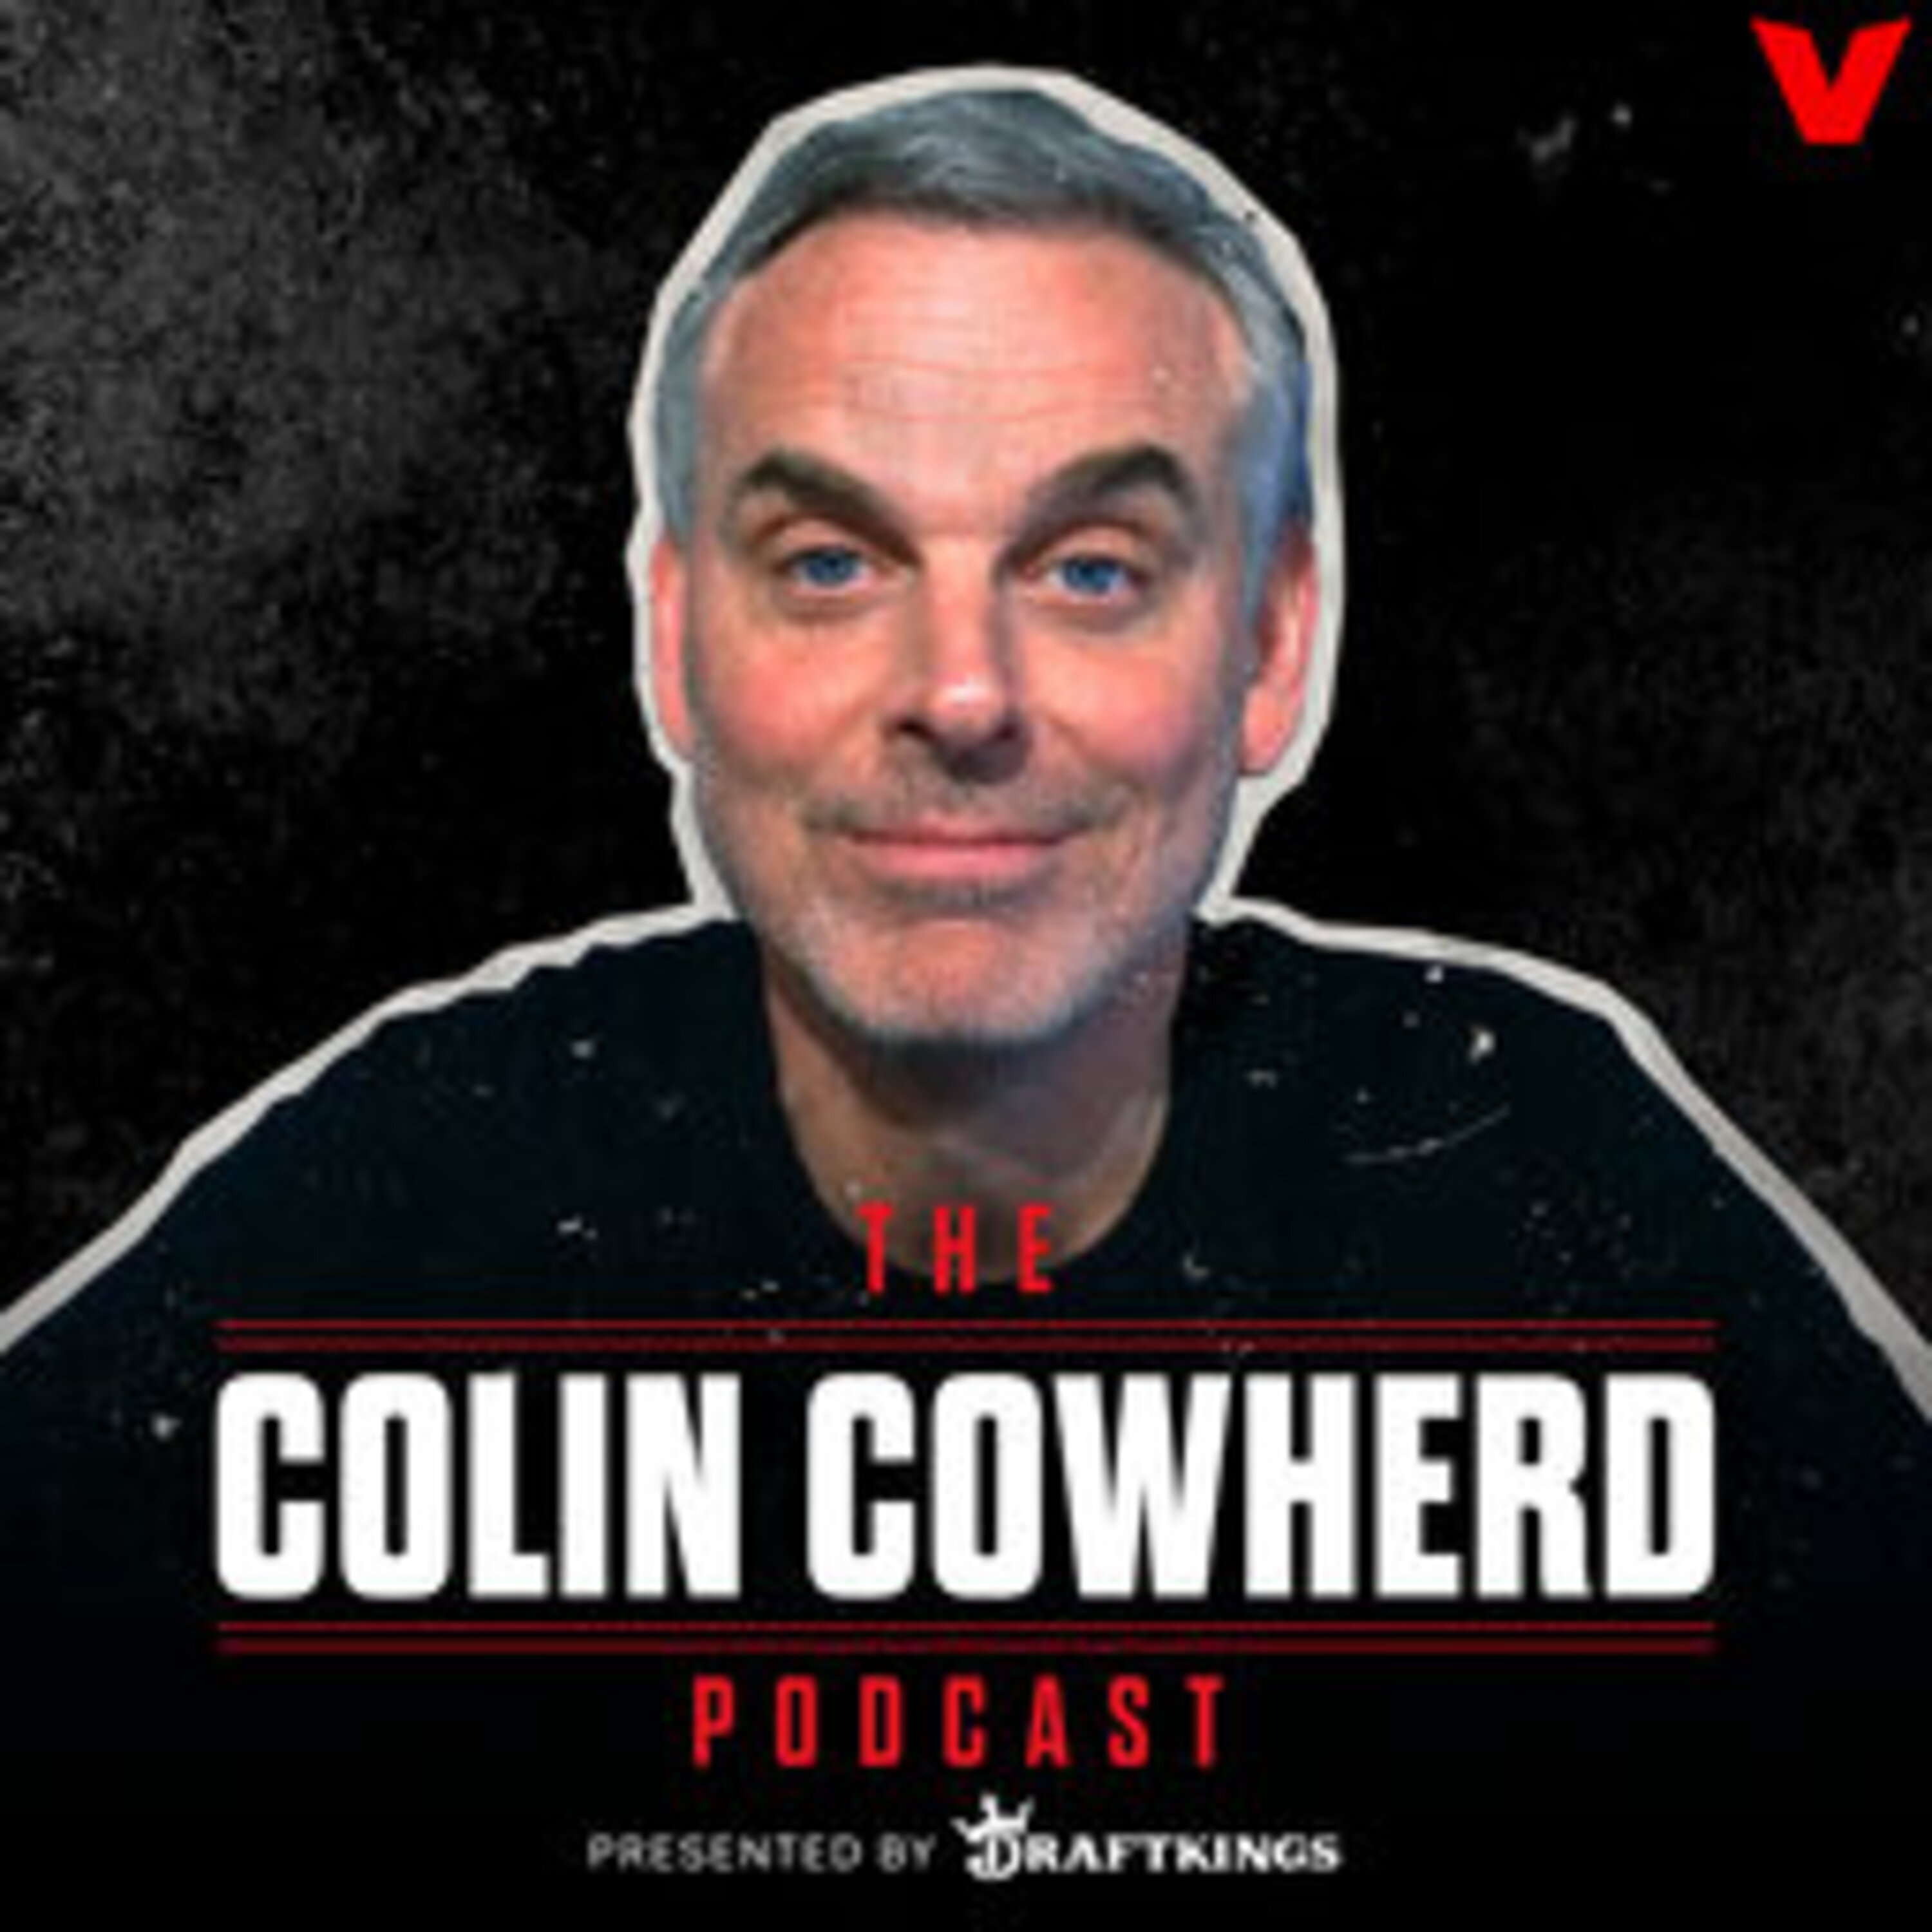 Colin Cowherd Podcast - INSTANT REACTION: Warriors Fall To Kings, Lakers Advance To Face Nuggets, Zion’s Best Game